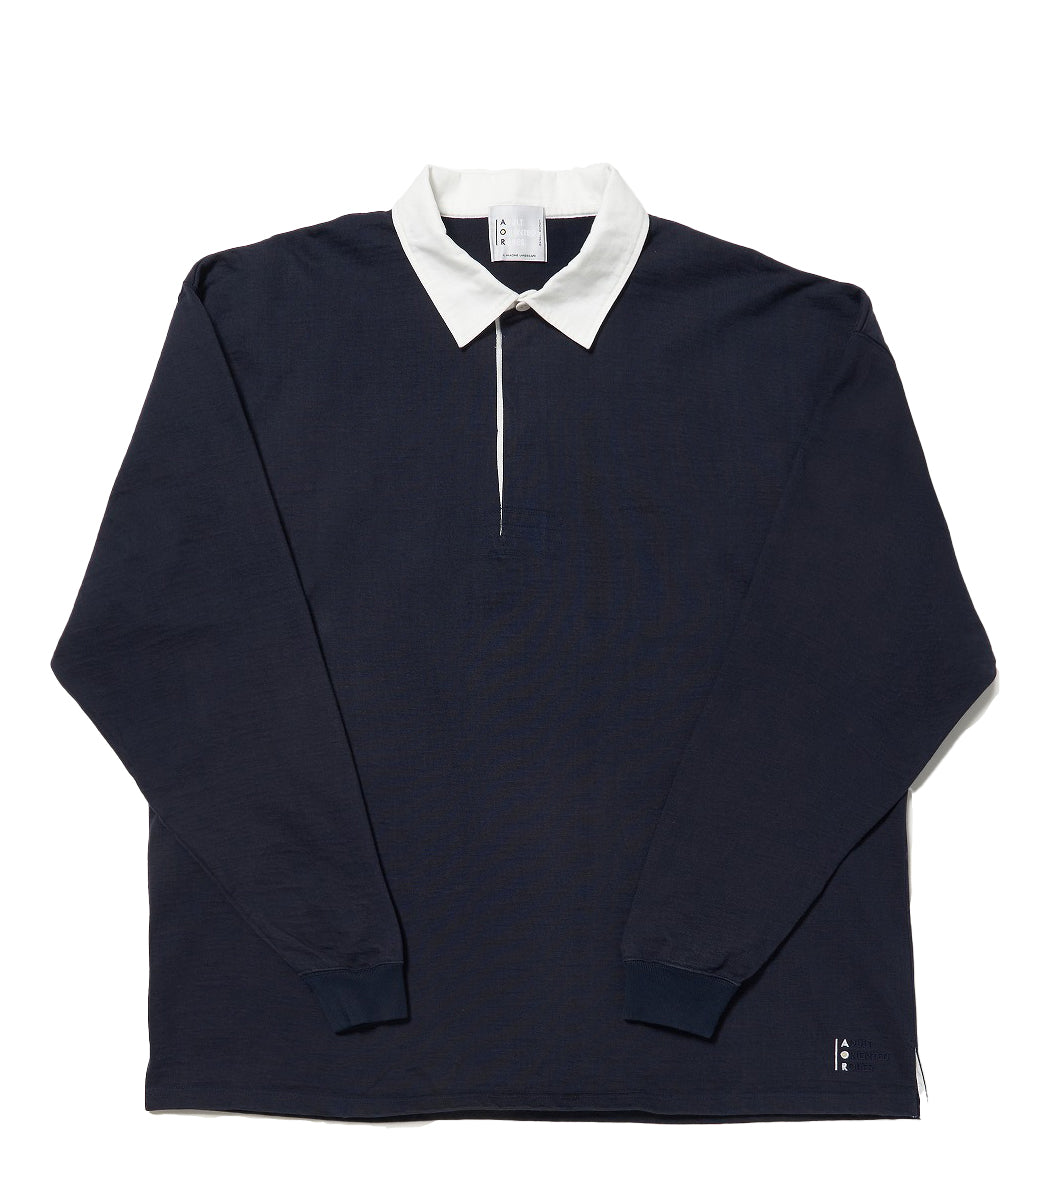 L/S Rugby Shirt NAVY